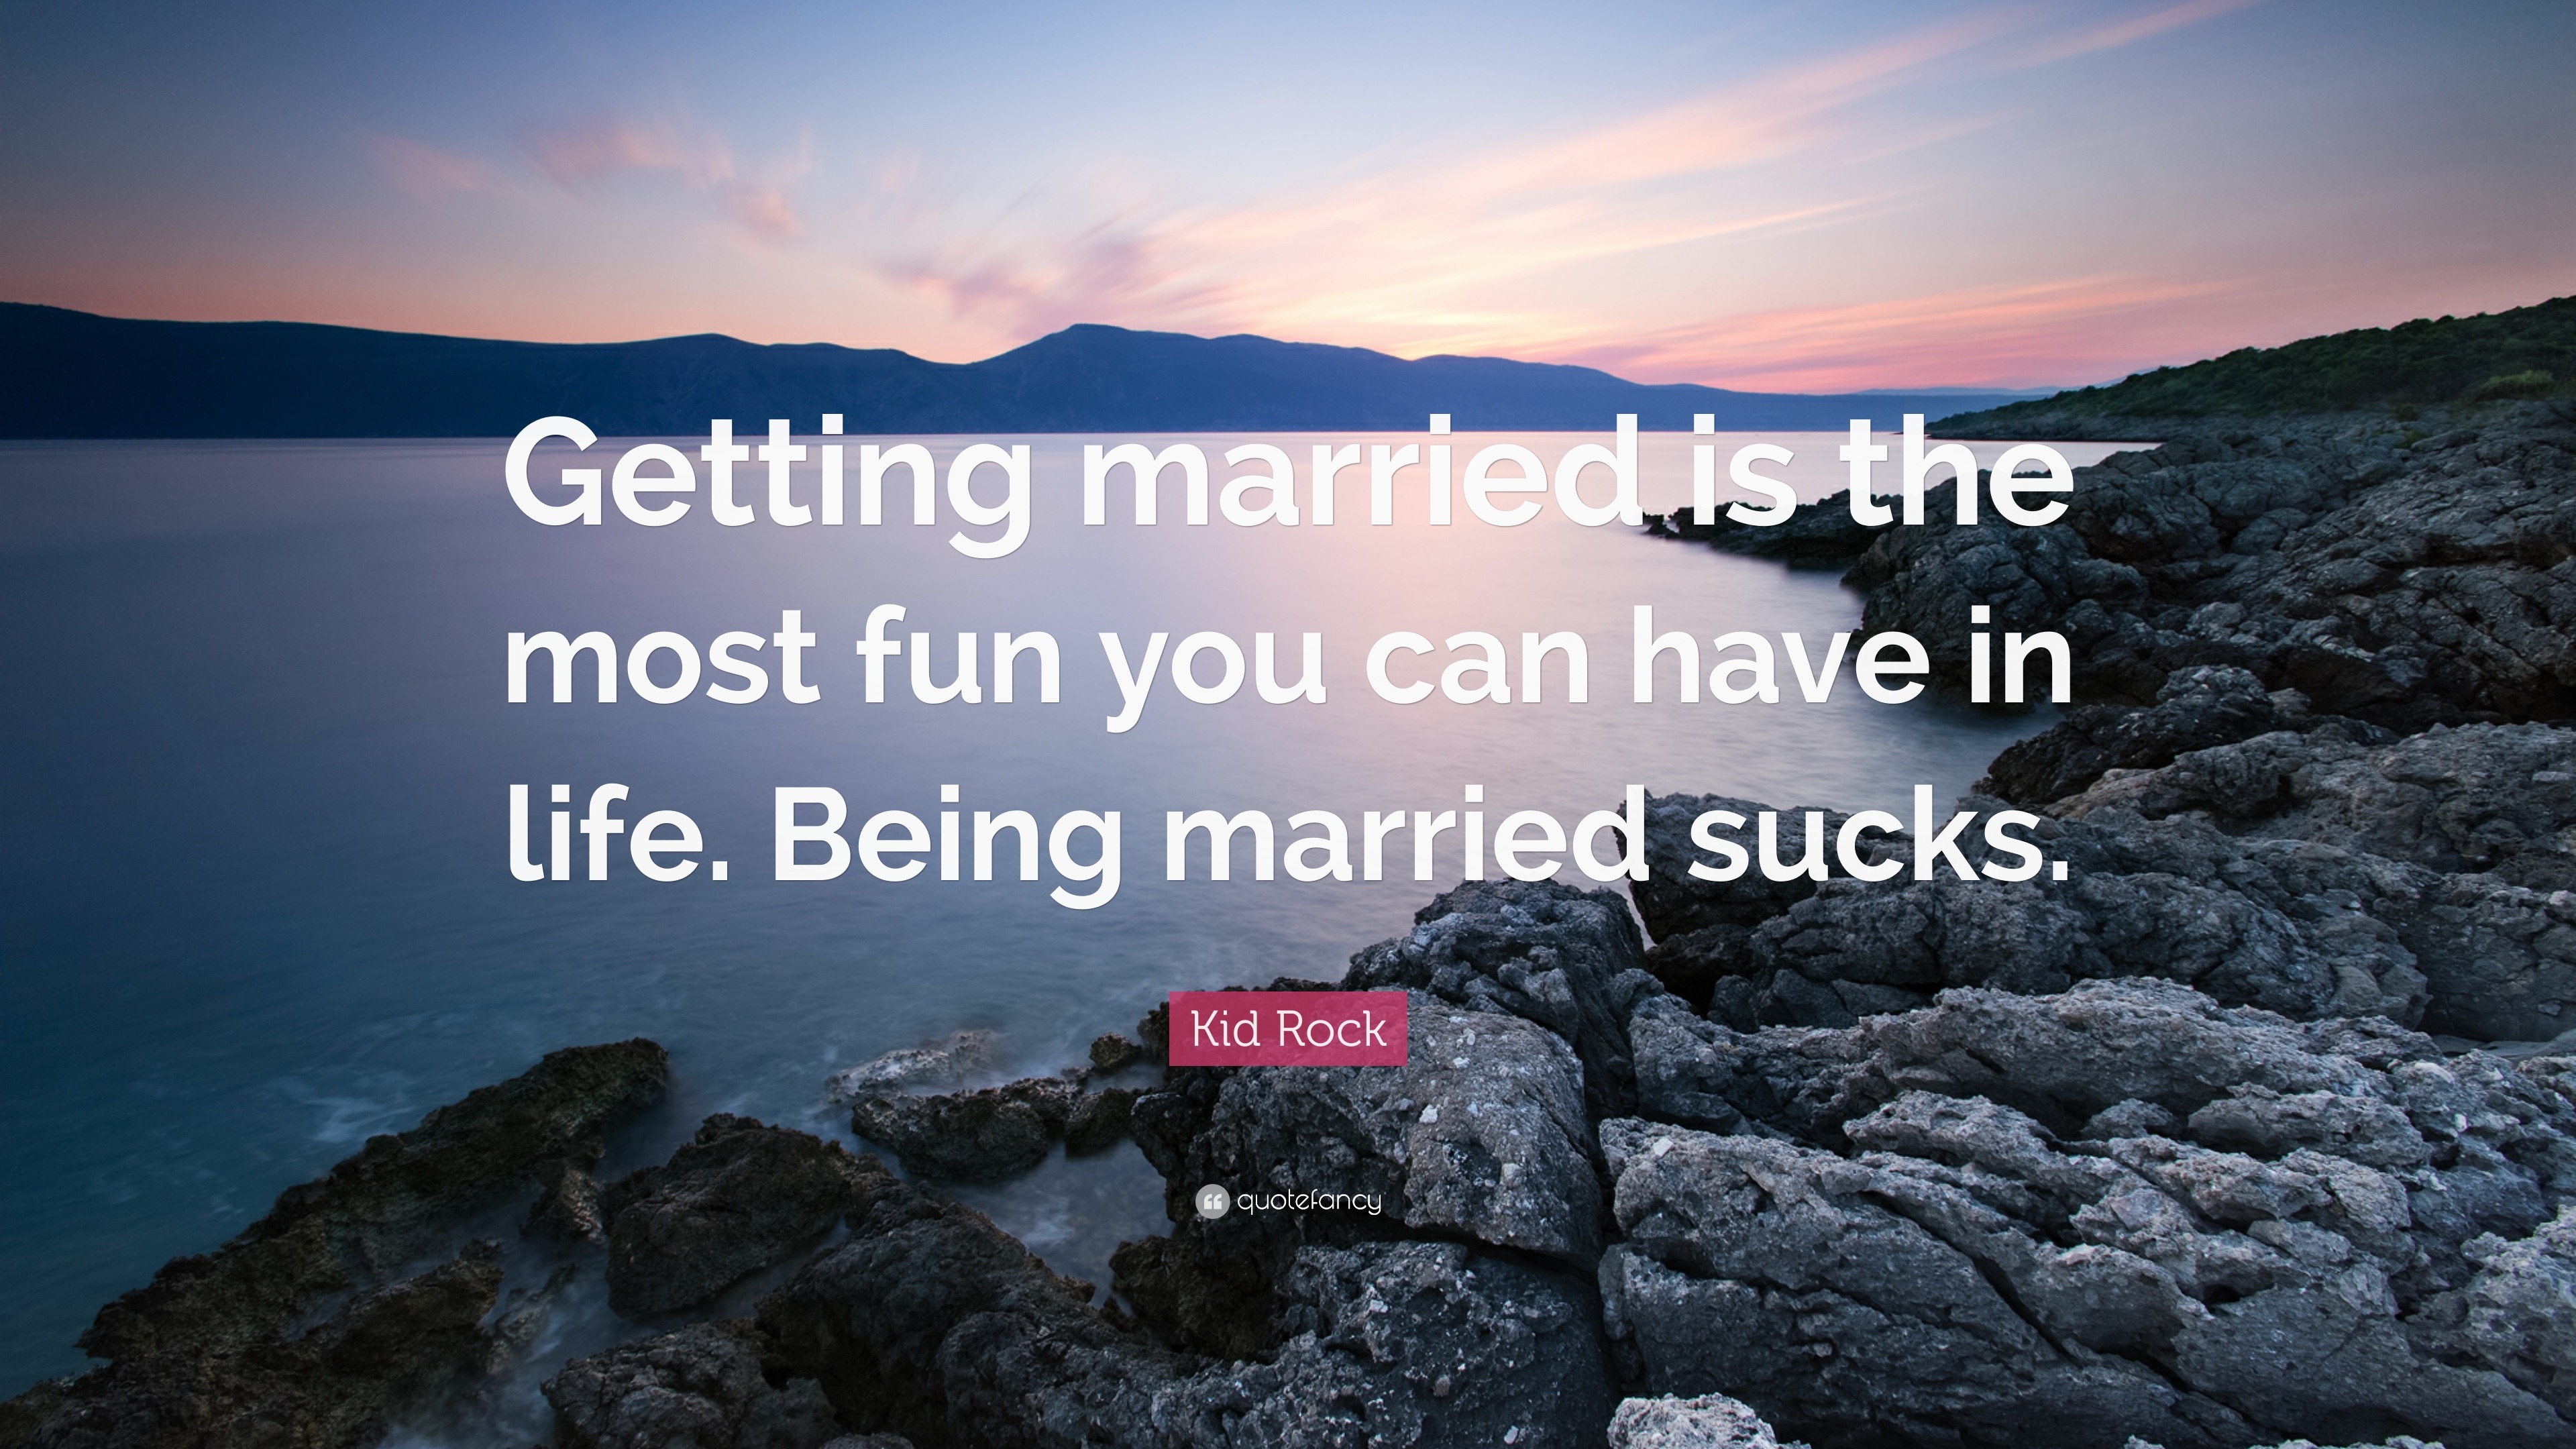 Kid Rock Quote “Getting married is the photo